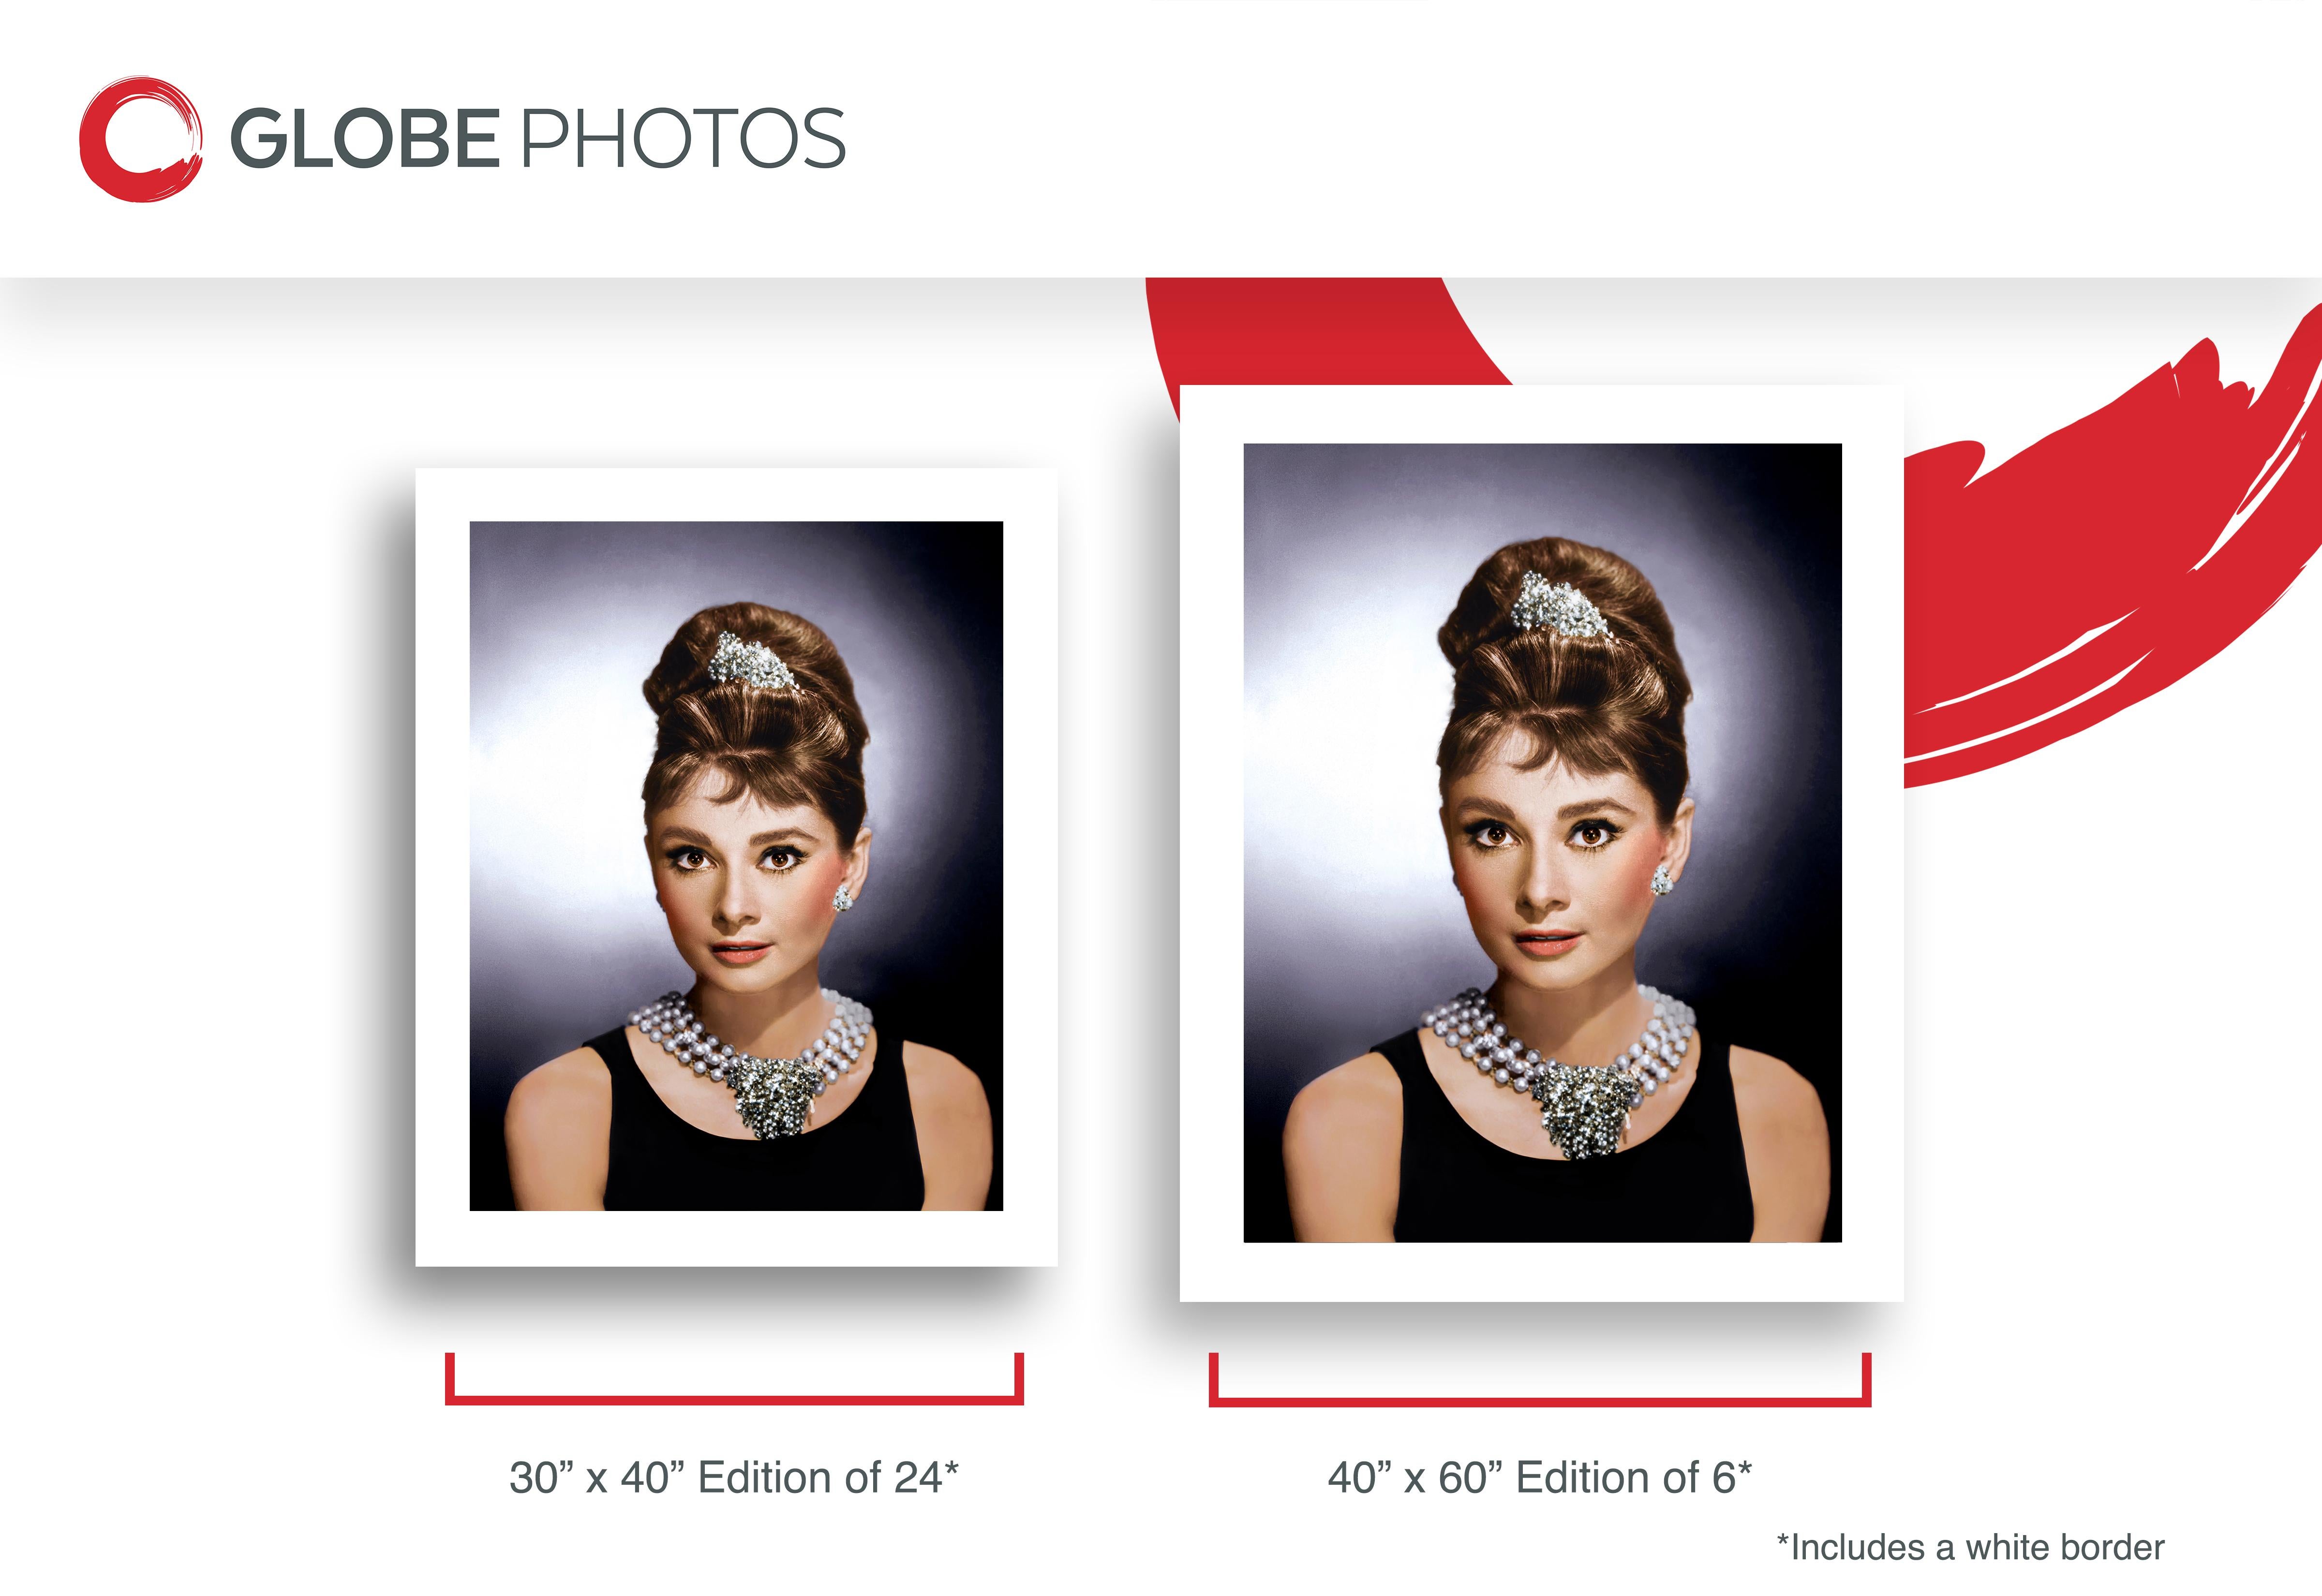 This elegant selectively colored promotional portrait features Audrey Hepburn in her role for 